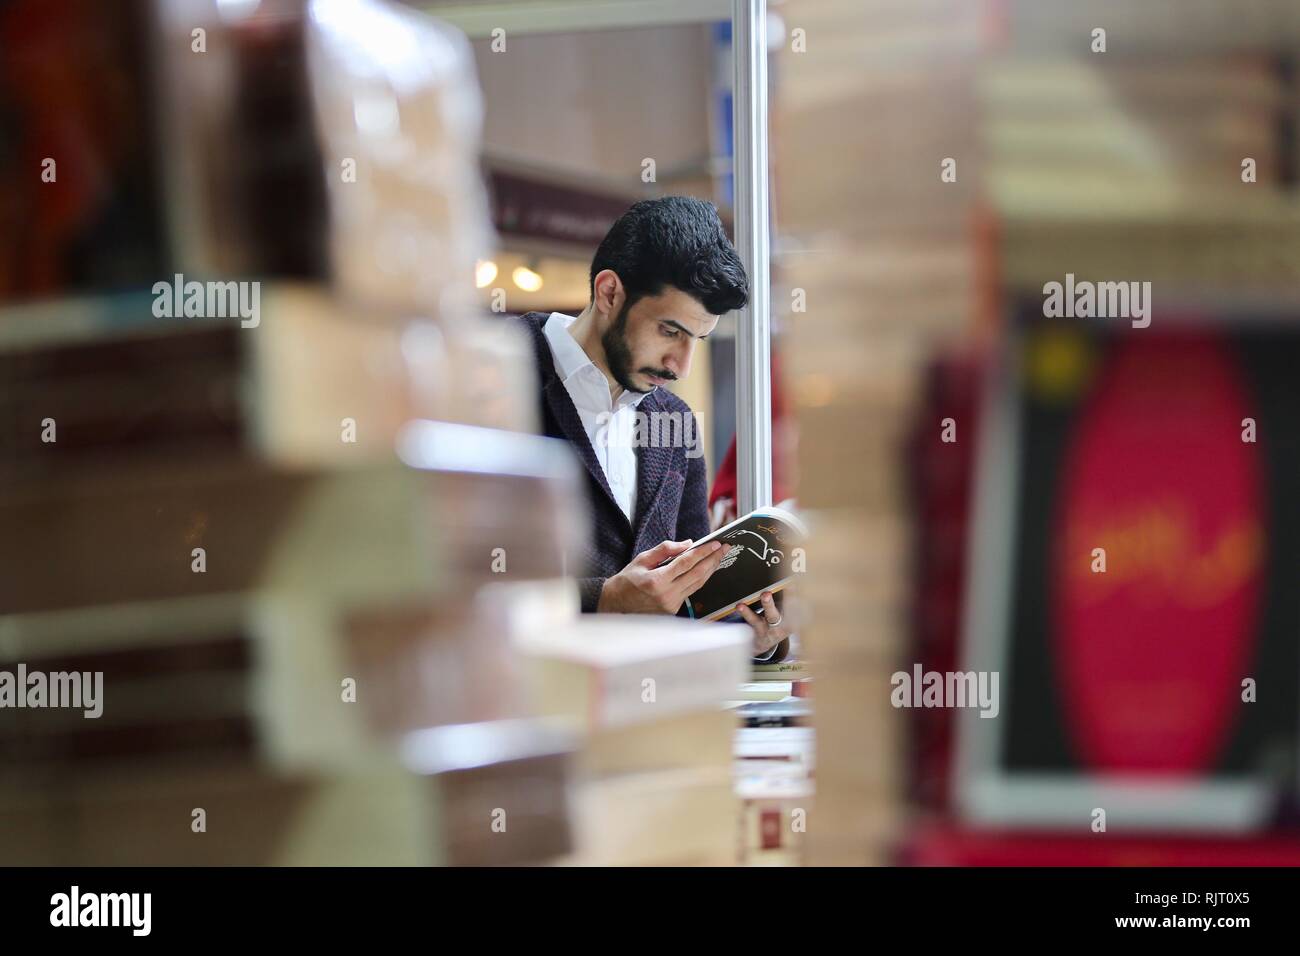 Baghdad, Iraq. 7th Feb, 2019. A man reads a book at the Baghdad International Book Fair 2019, in Baghdad, Iraq, Feb. 7, 2019. The fair kicked off Thursday with the participation of hundreds of publishers and high attendance of readers, as it sheds more light on eradicating terror and extremism in the war-torn country. Credit: Khalil Dawood/Xinhua/Alamy Live News Stock Photo